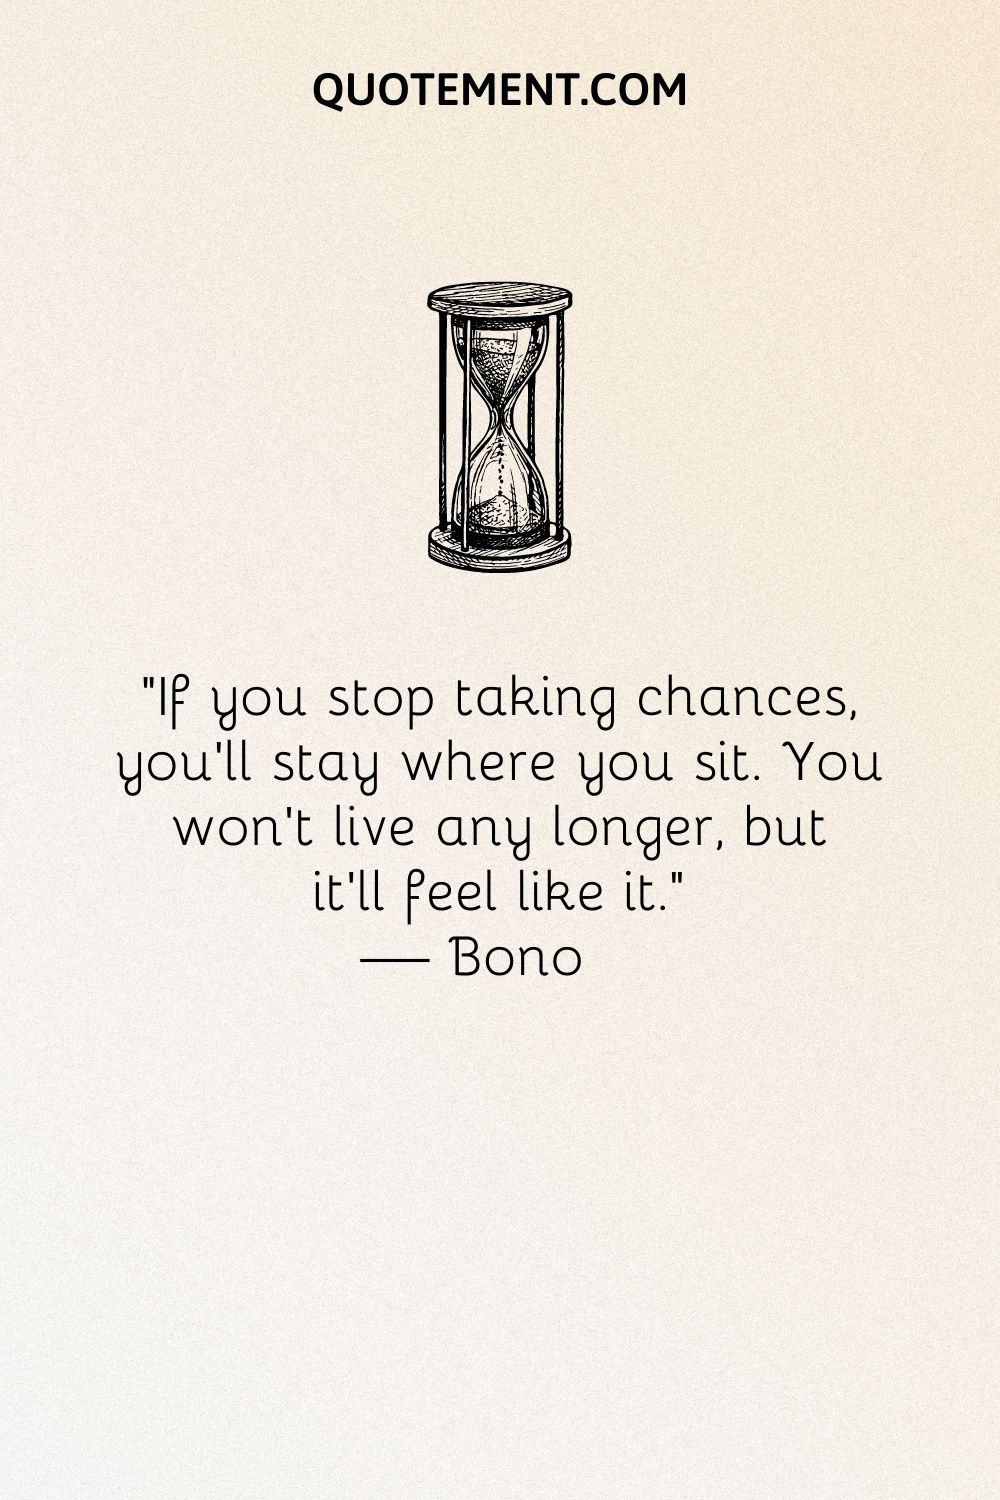 If you stop taking chances, you'll stay where you sit.